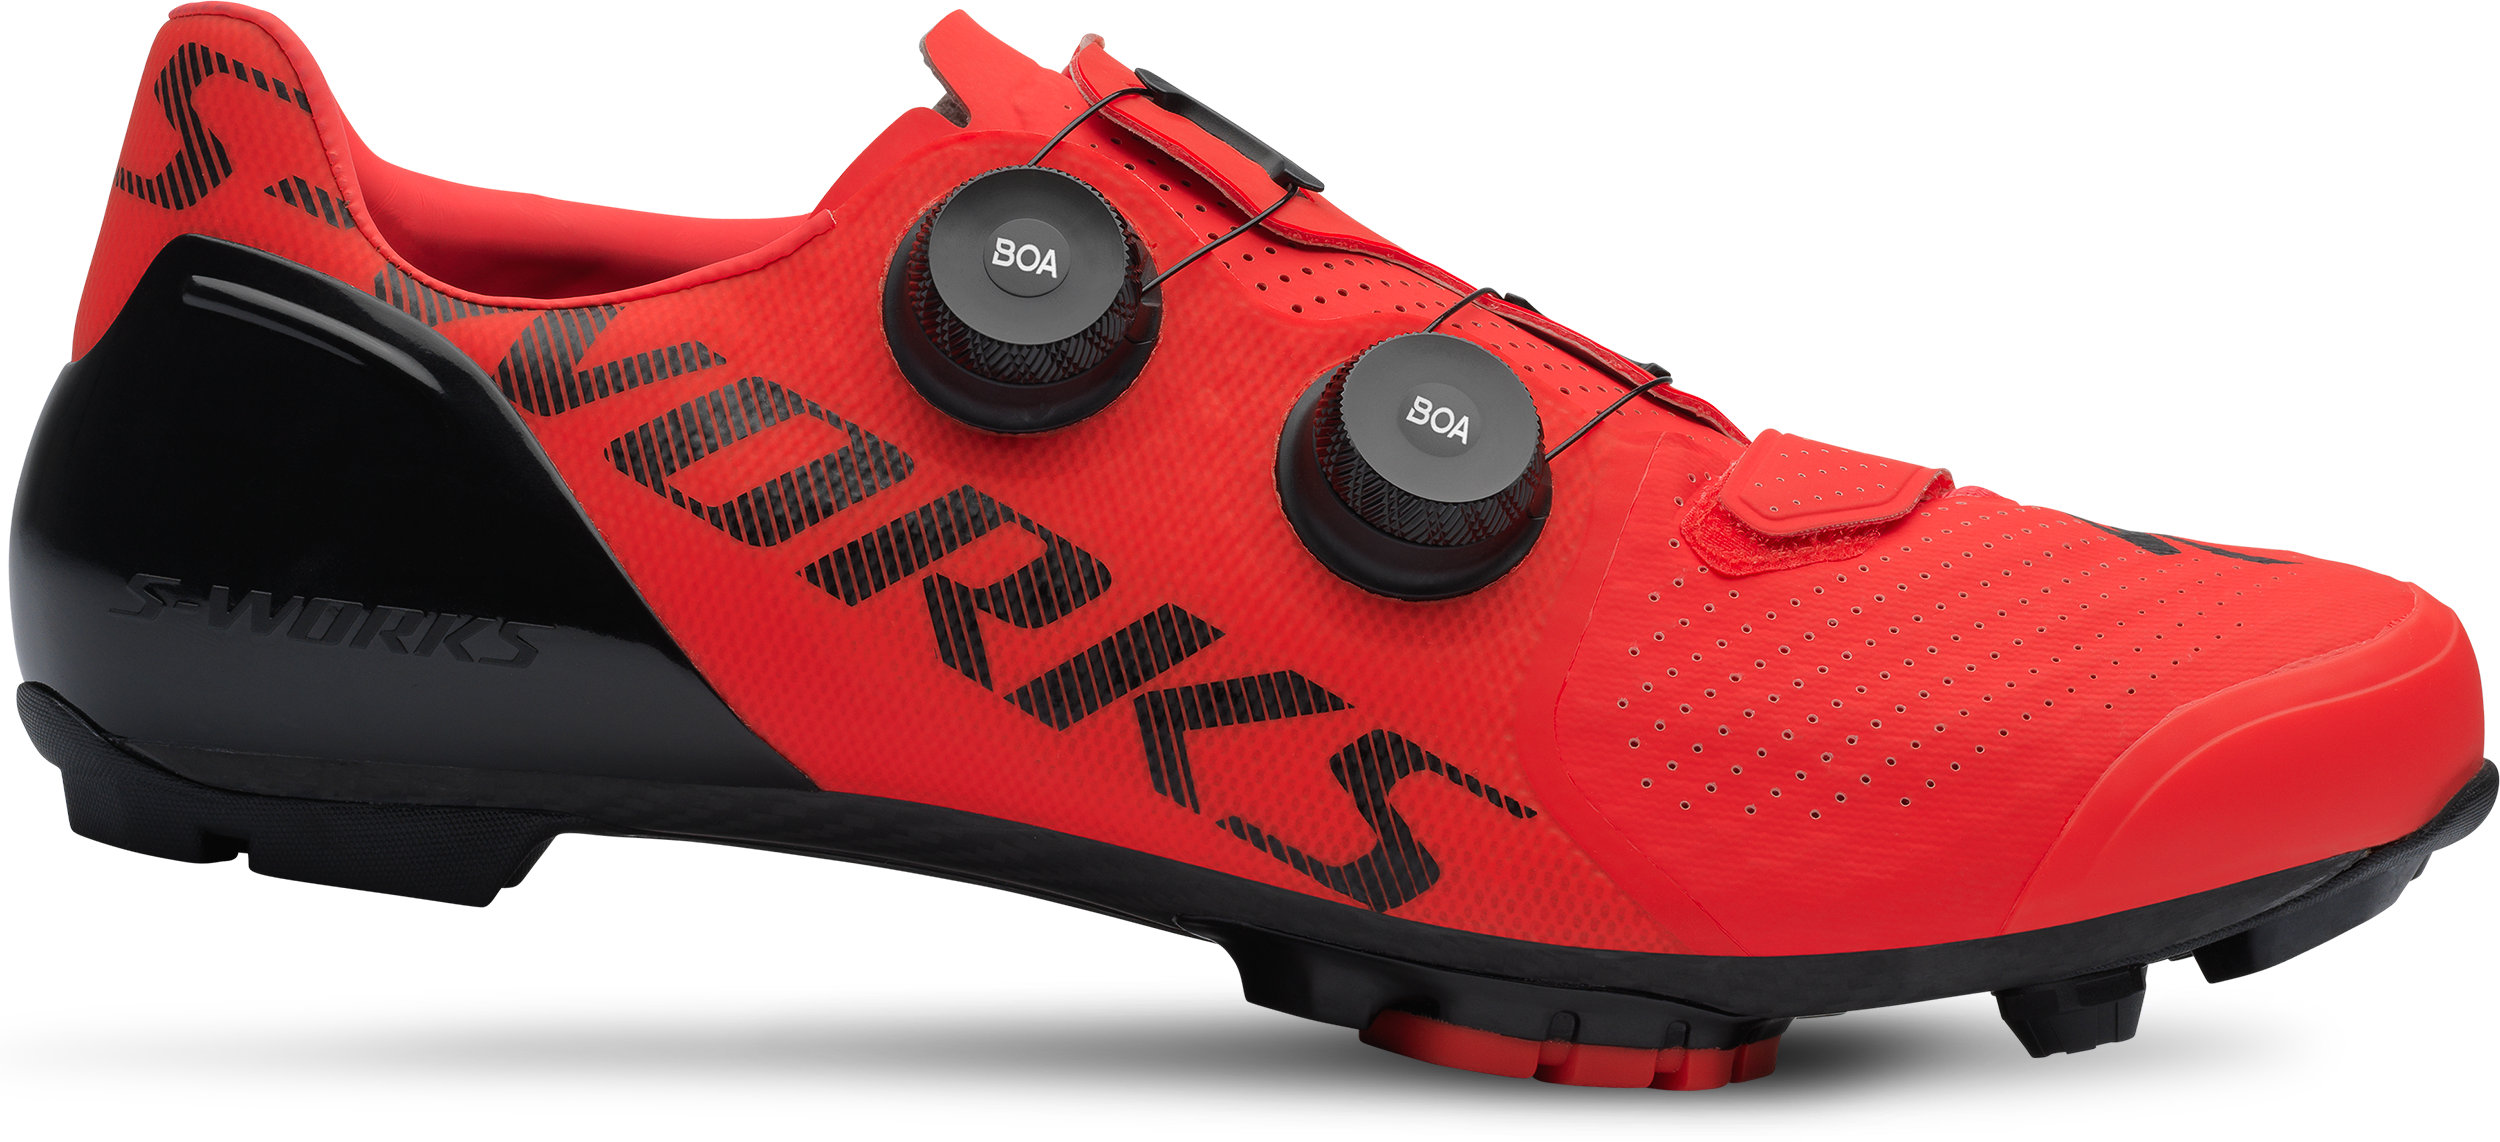 specialized cyclocross shoes